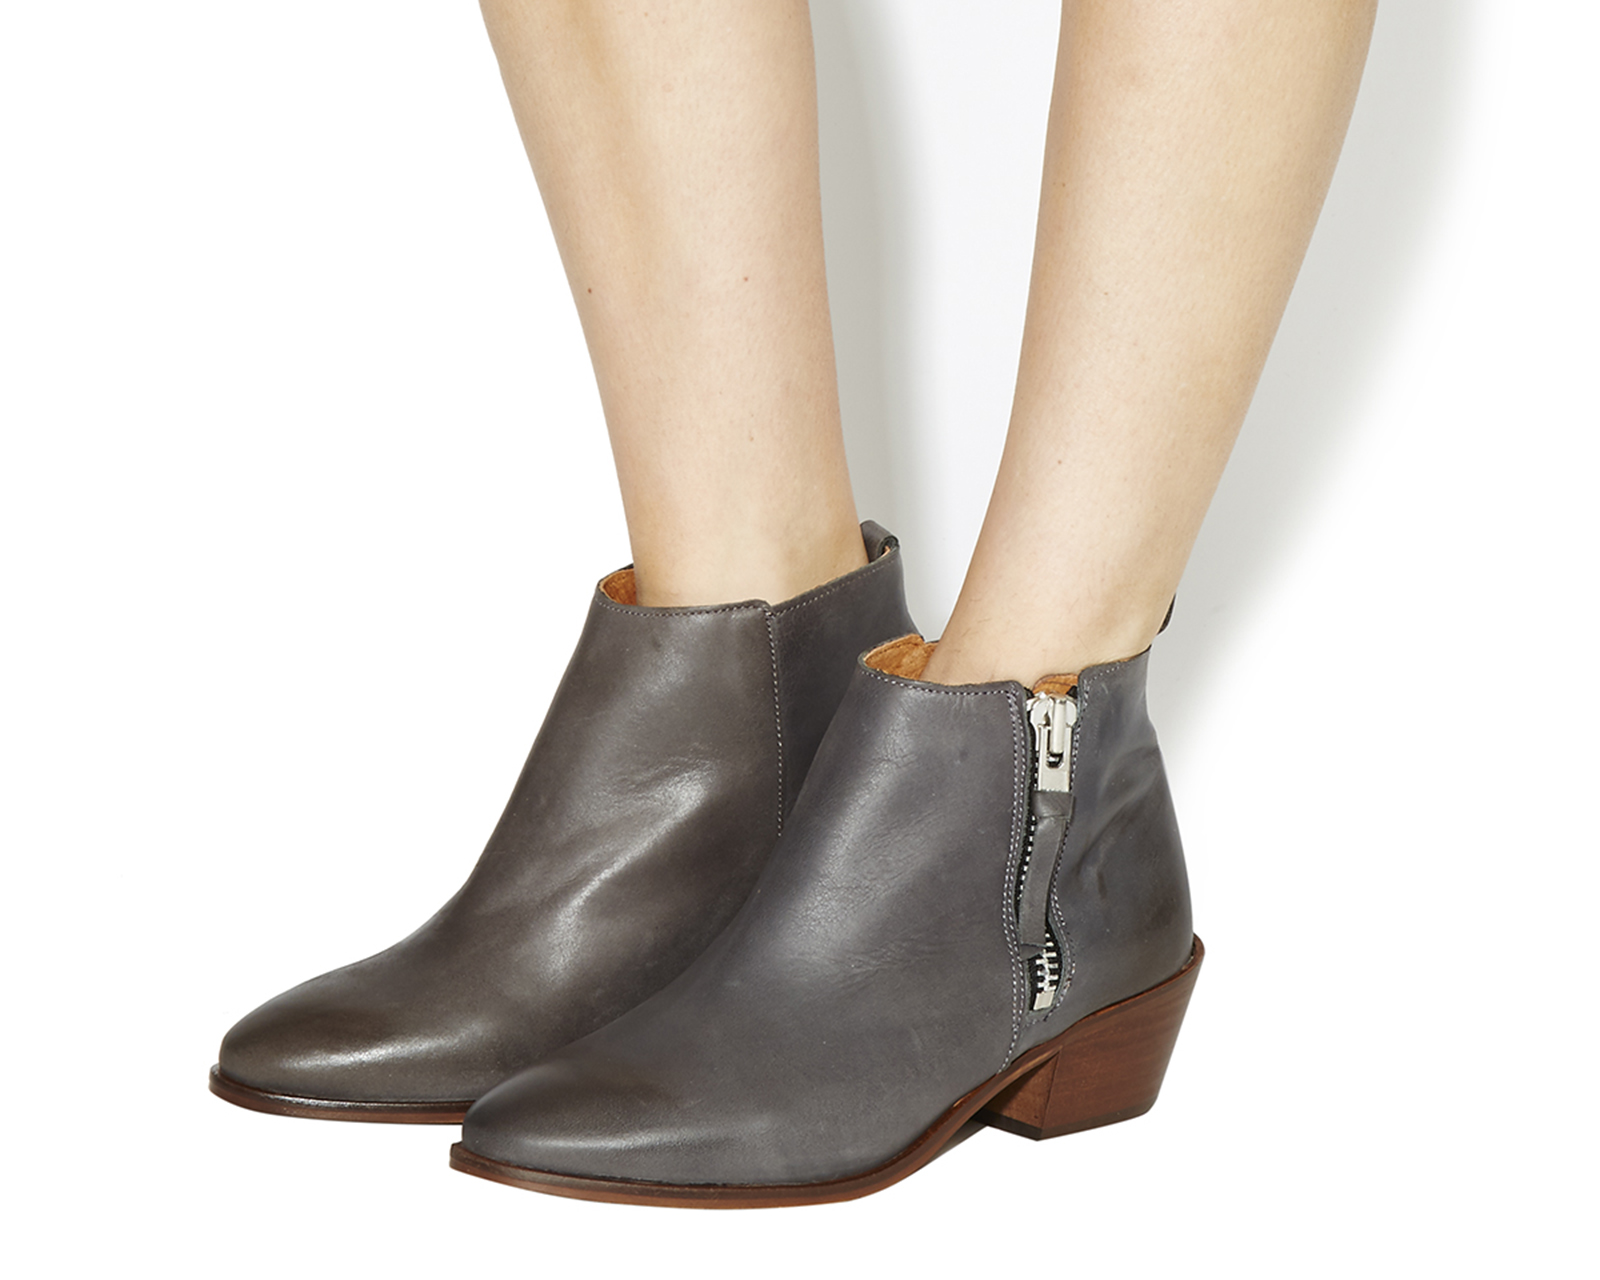 OFFICEImposter Side Zip Ankle BootsGrey Leather